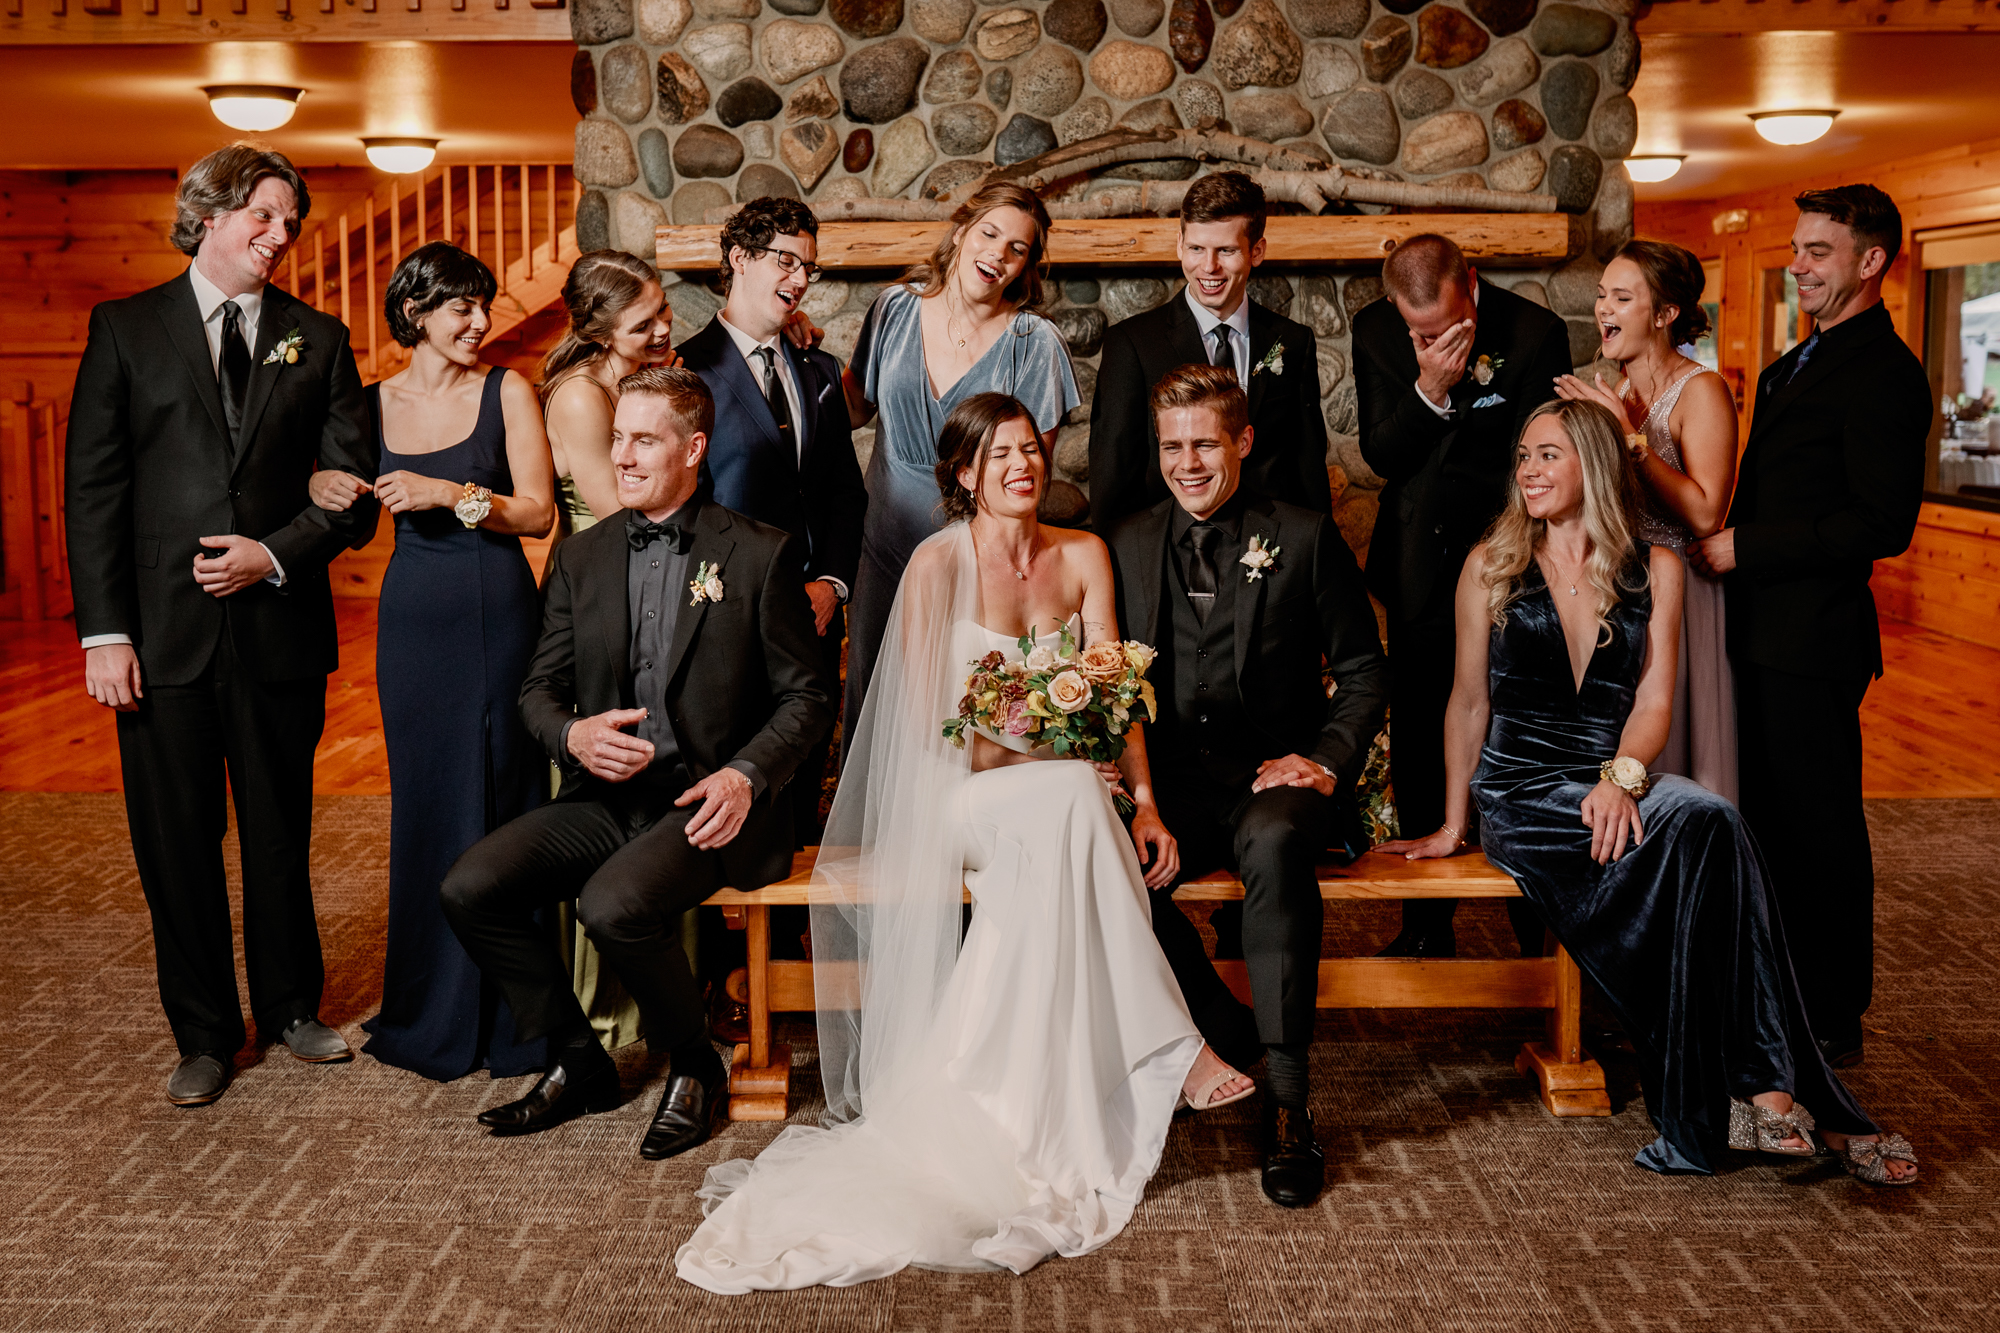 Mountain Springs Lodge weddings: Fletcher and Veronica and her wedding party